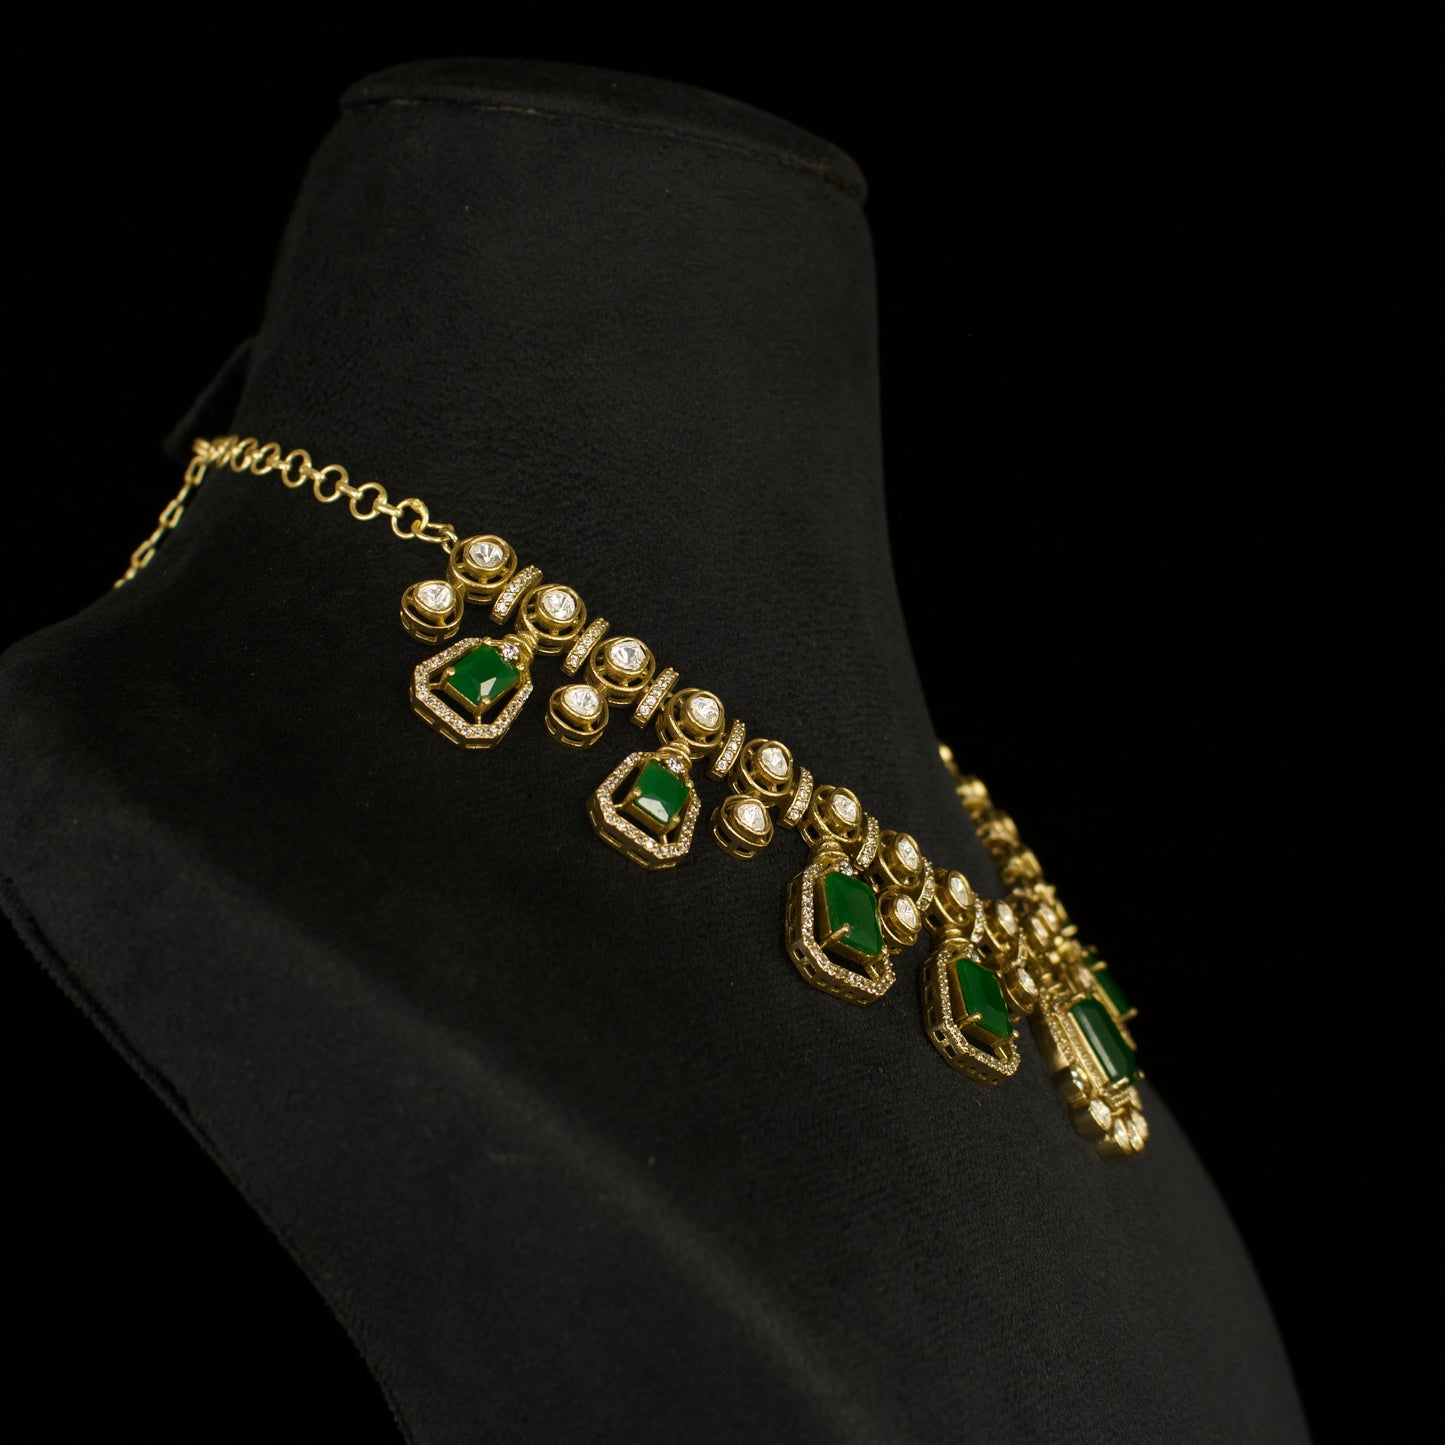 Elegant Square-cut Victorian Necklace with earrings